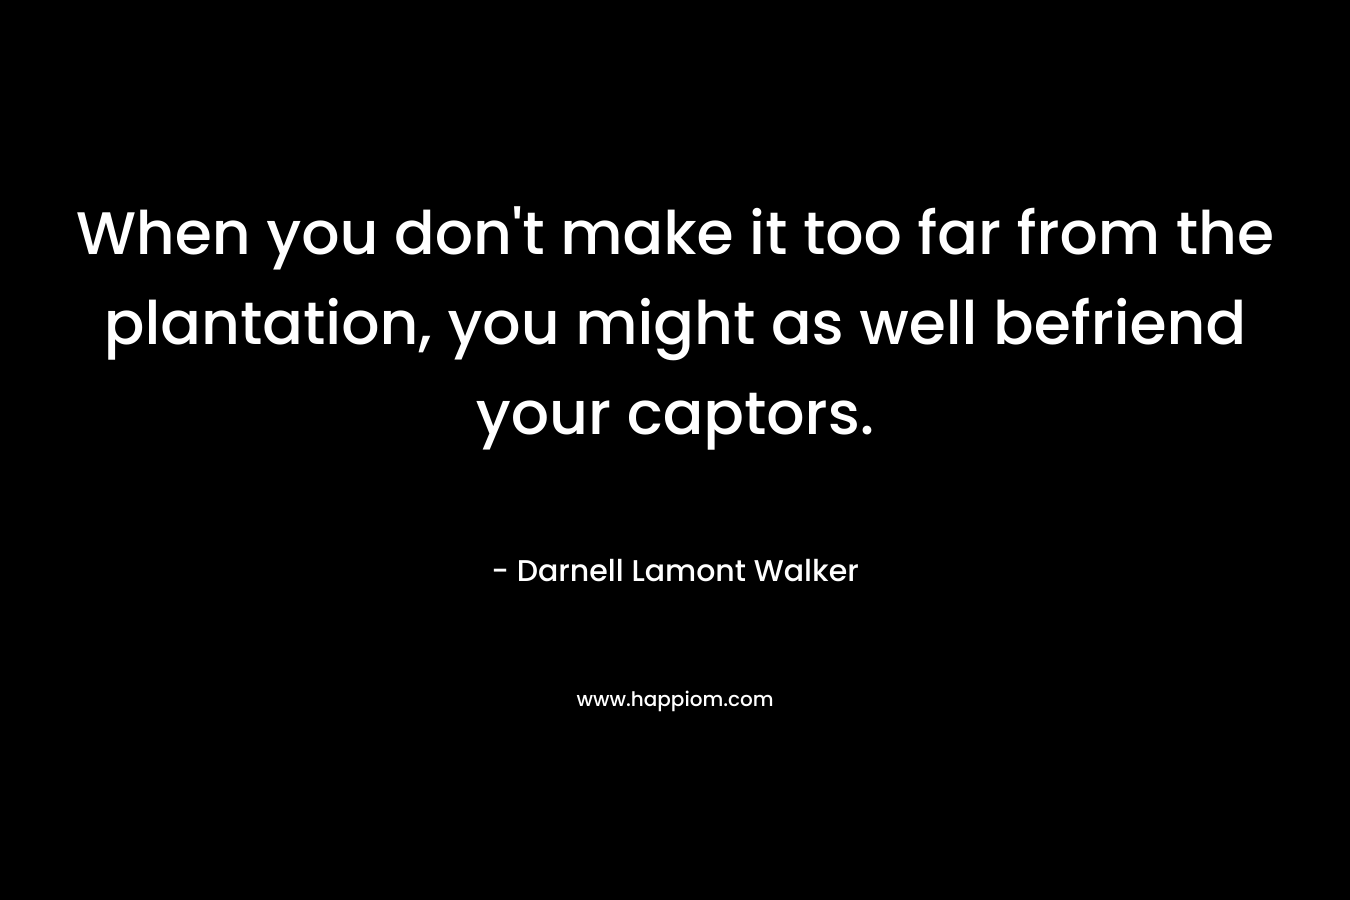 When you don’t make it too far from the plantation, you might as well befriend your captors. – Darnell Lamont Walker